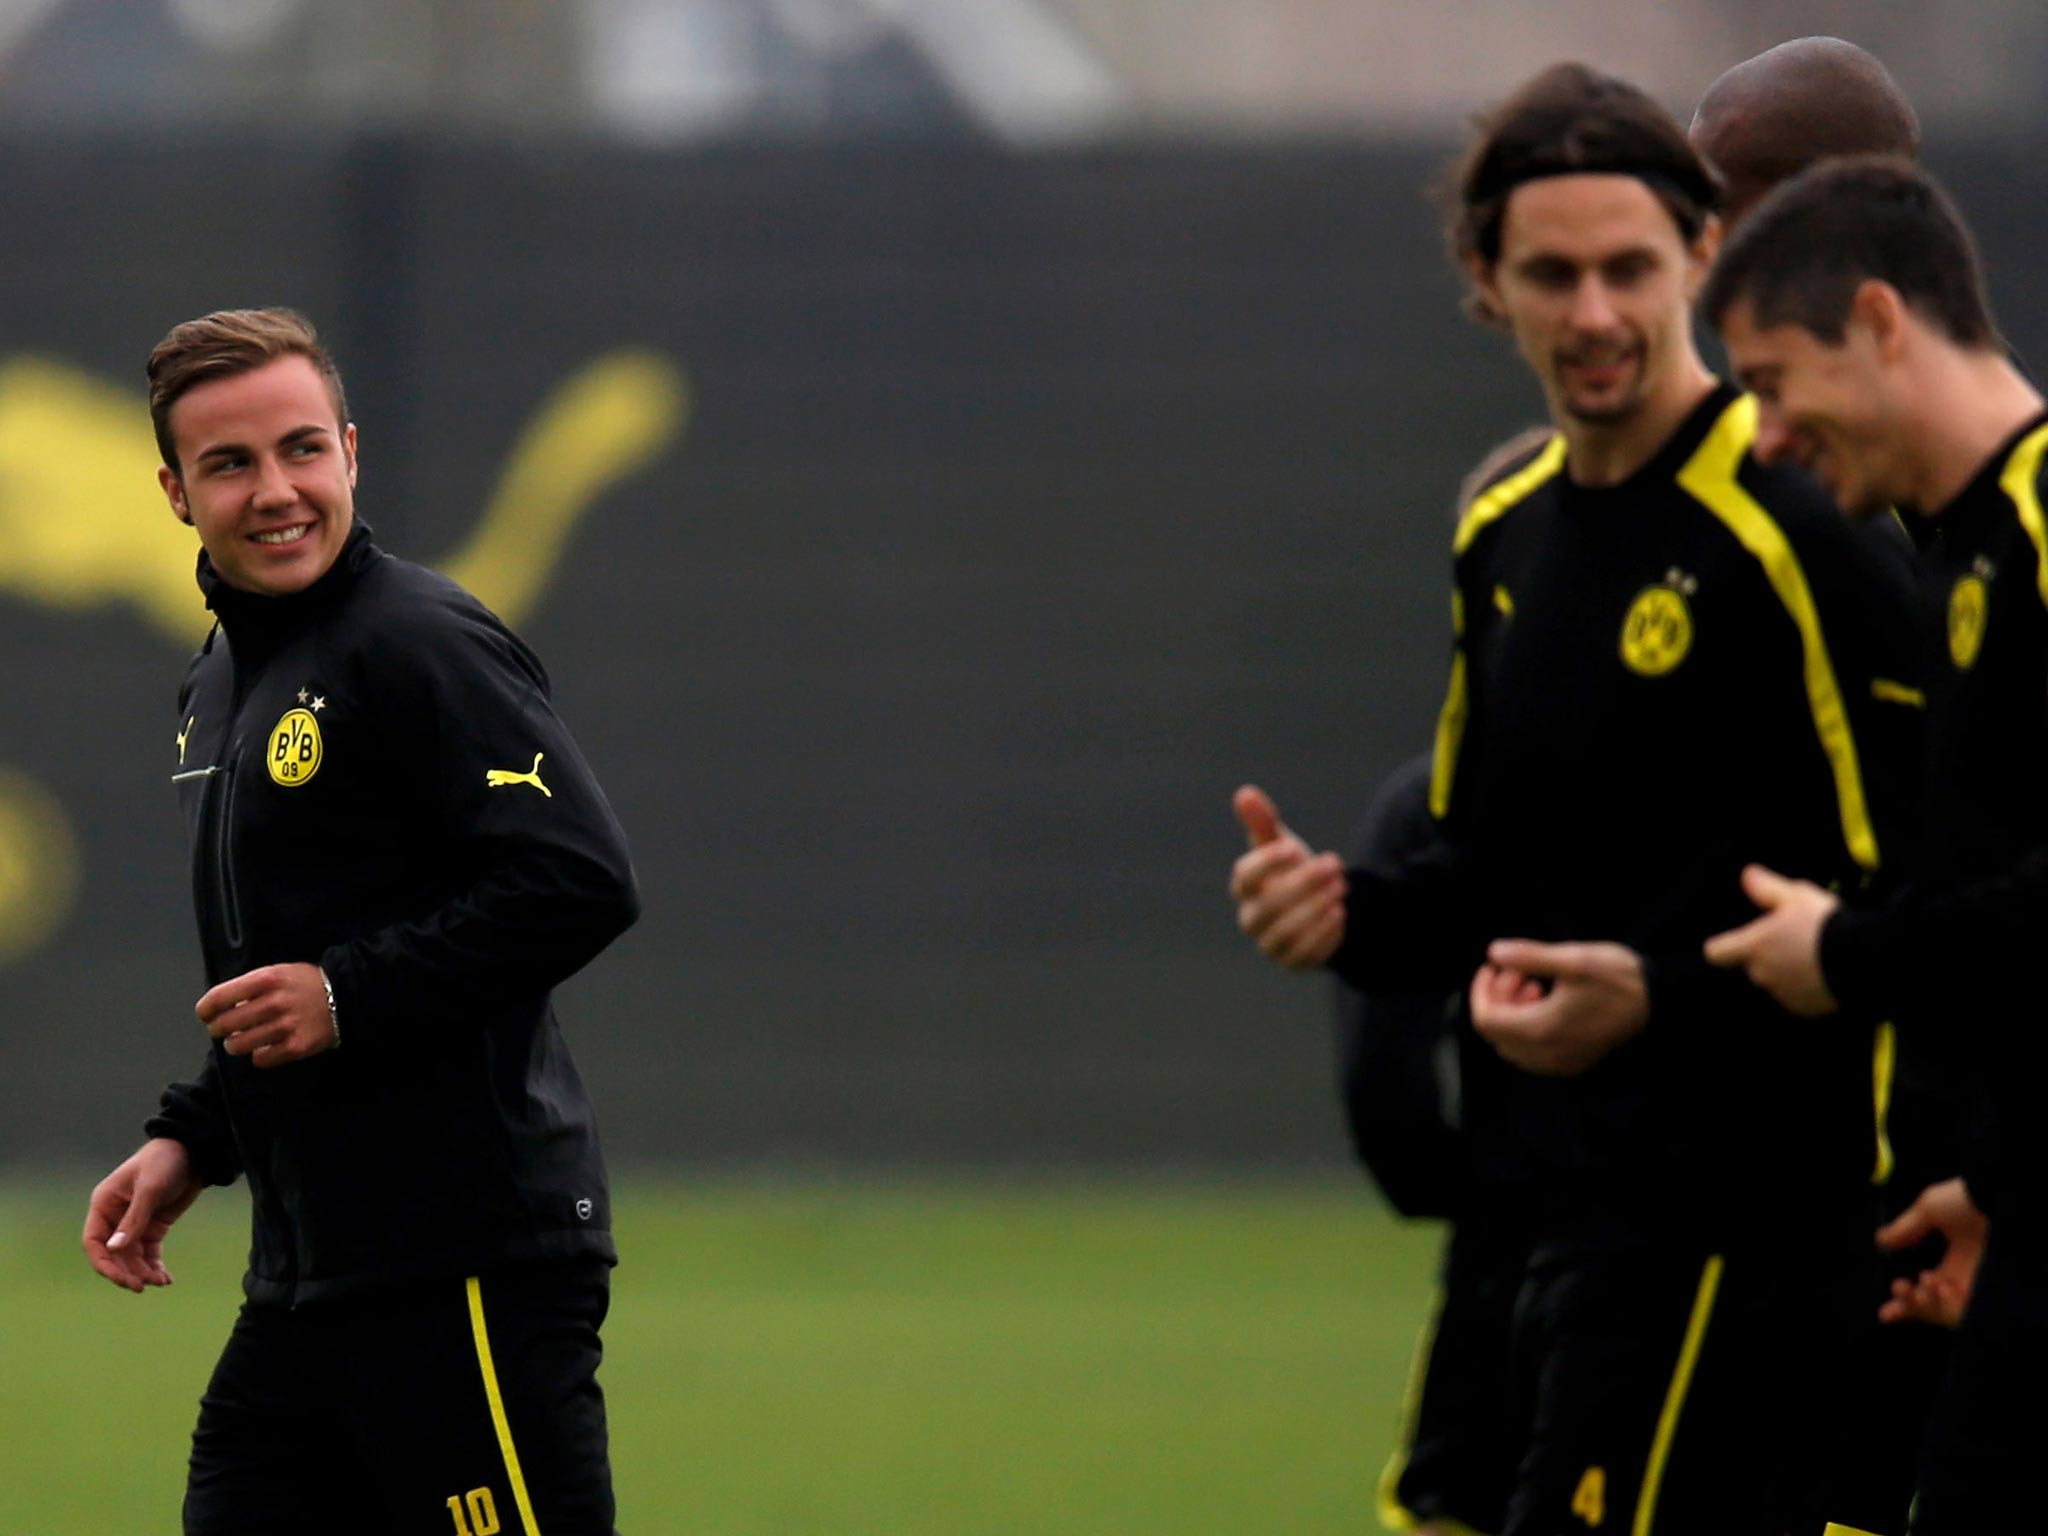 Mario Gotze trains with his team-mates ahead of the match with Real Madrid